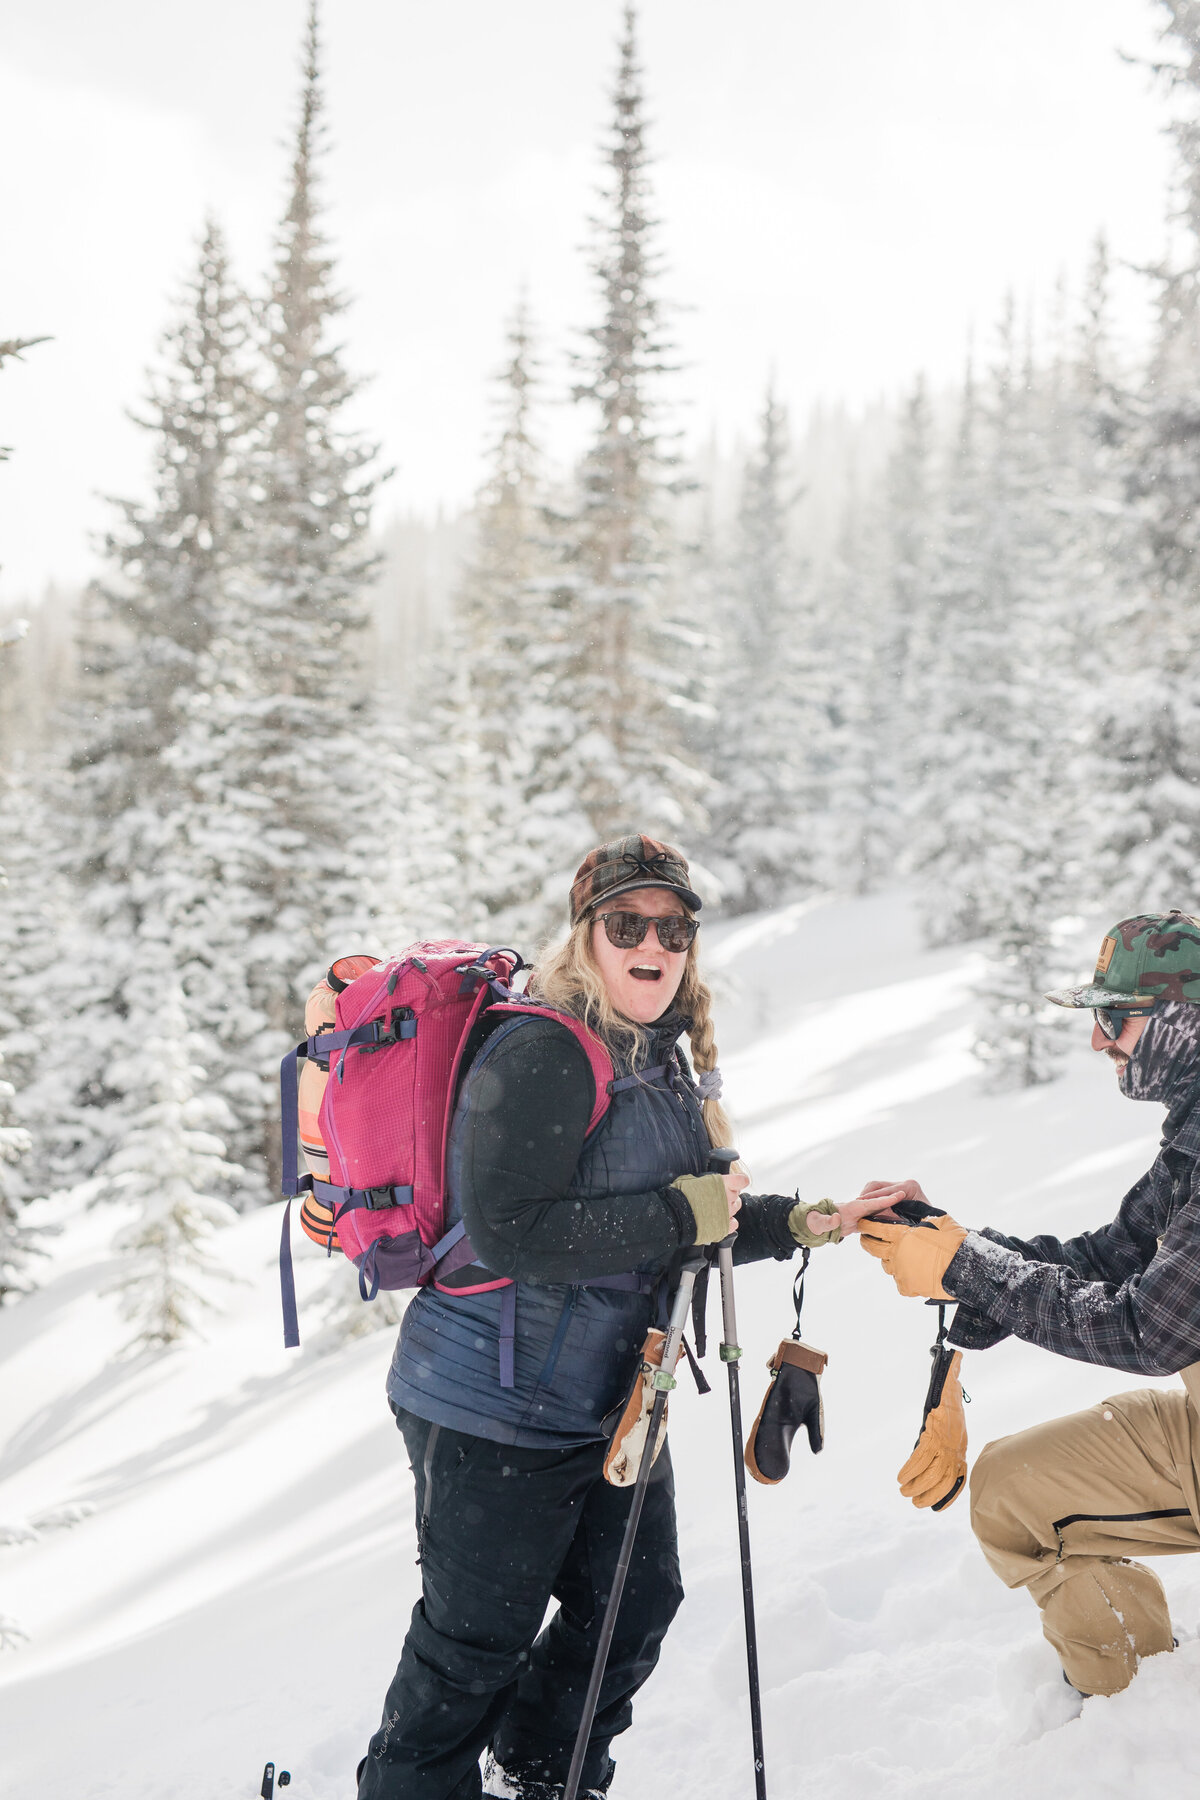 A woman in all backcountry gear looks surprised at the camera as her boyfriend gets down on one knee and she realizes she is being proposed to